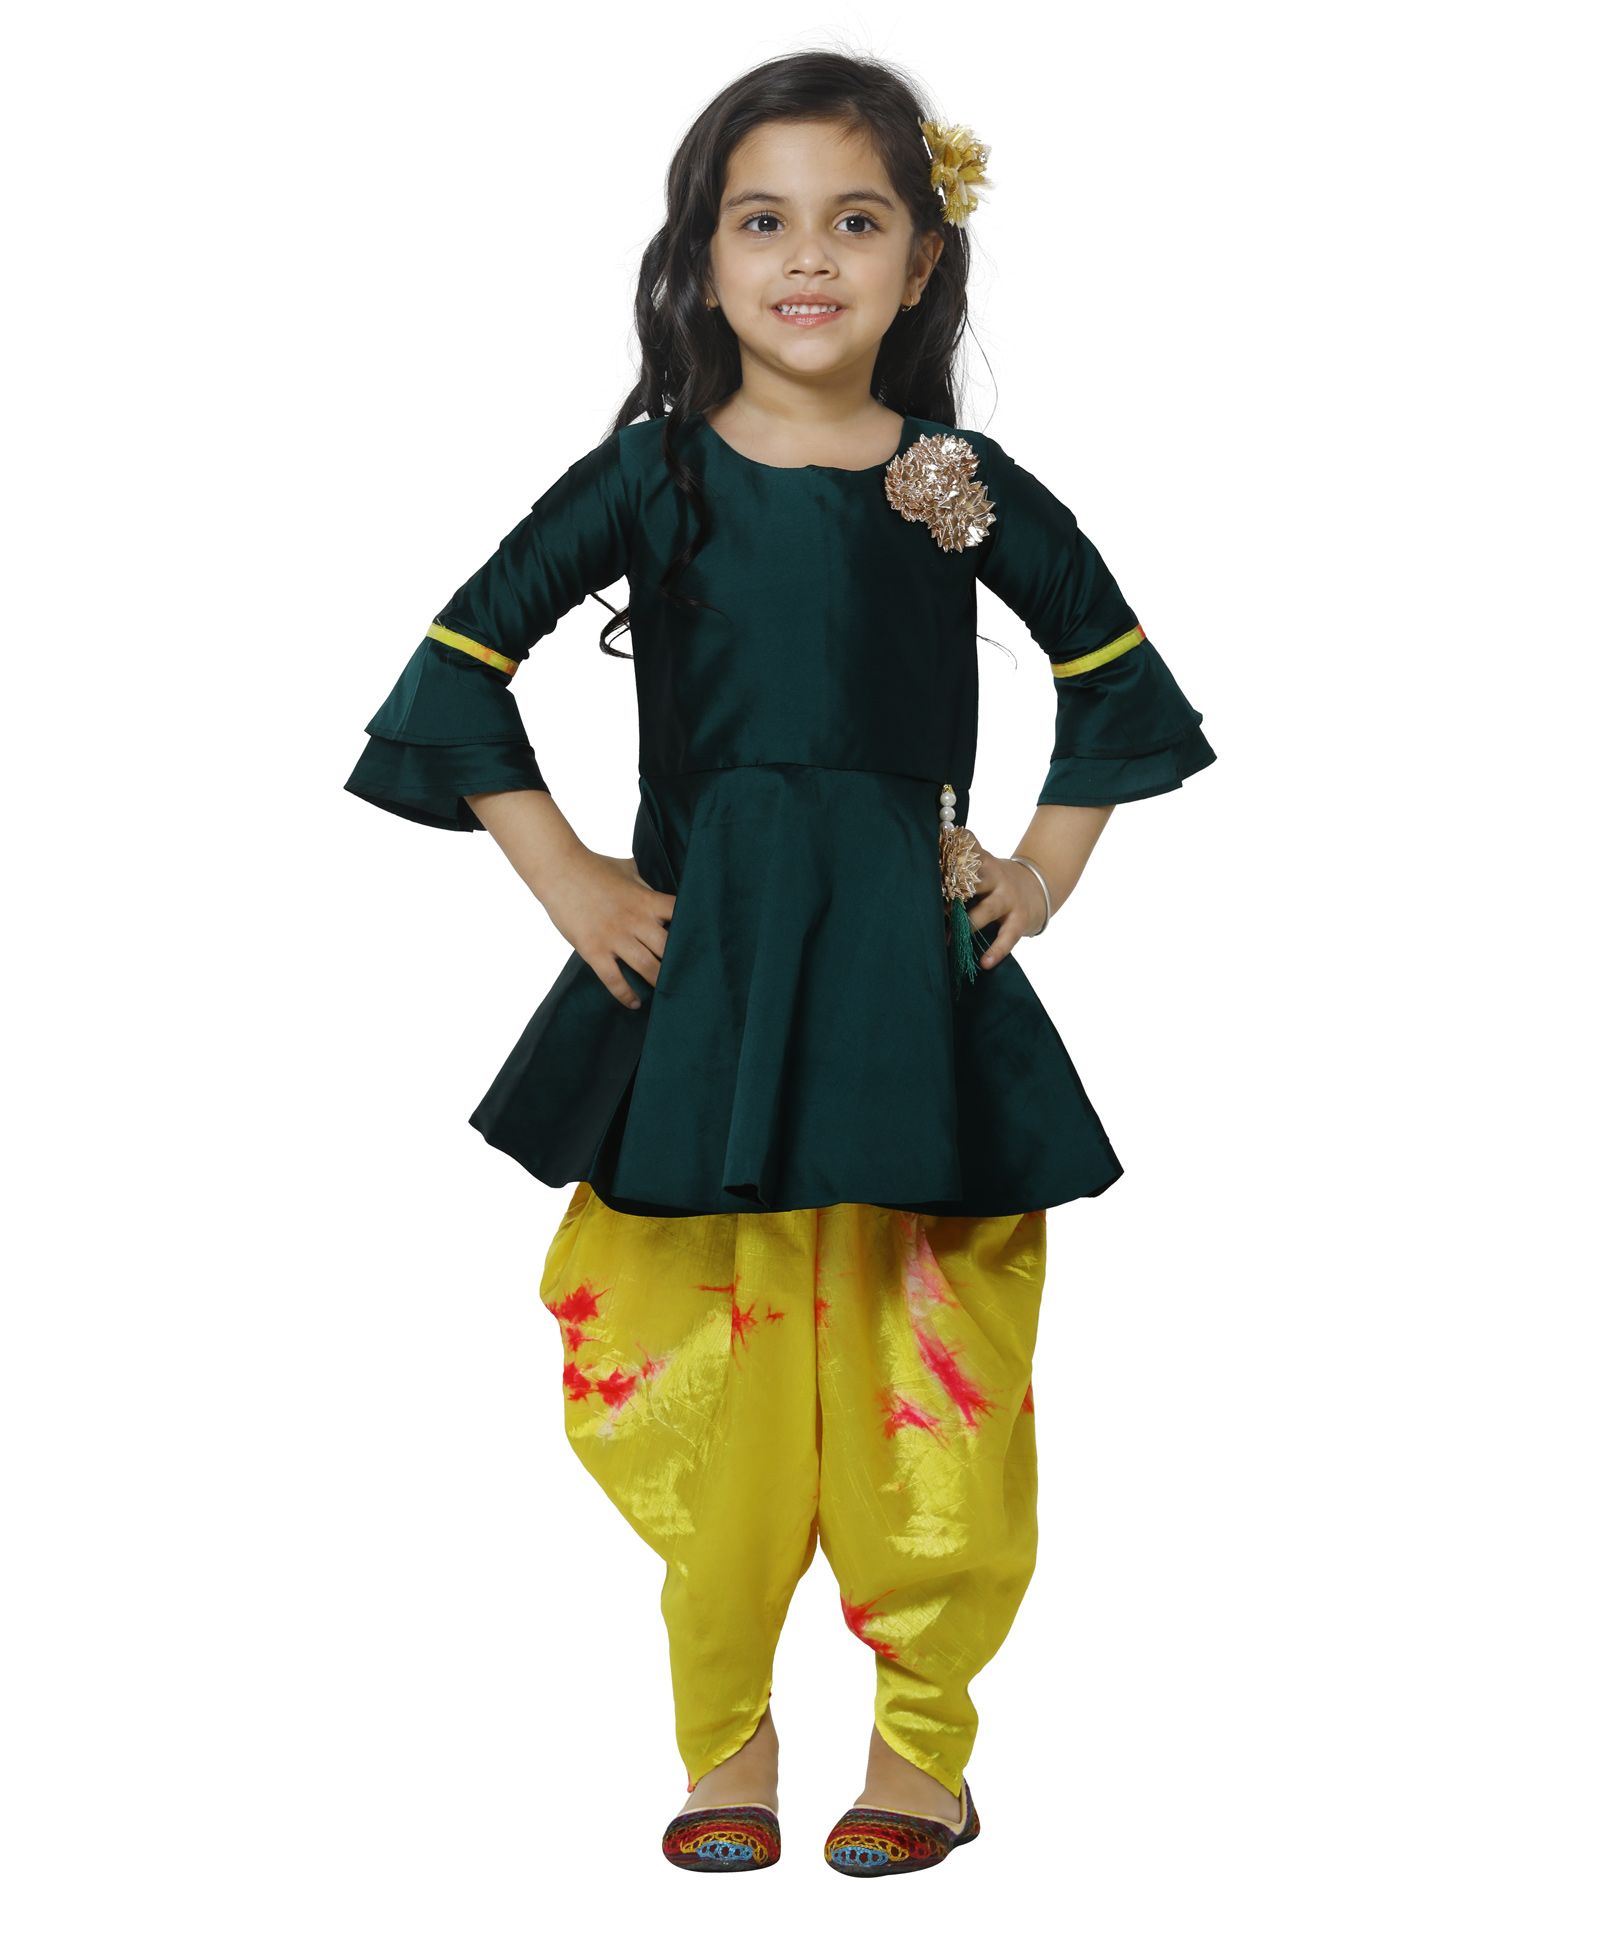 lungi dress for baby girl